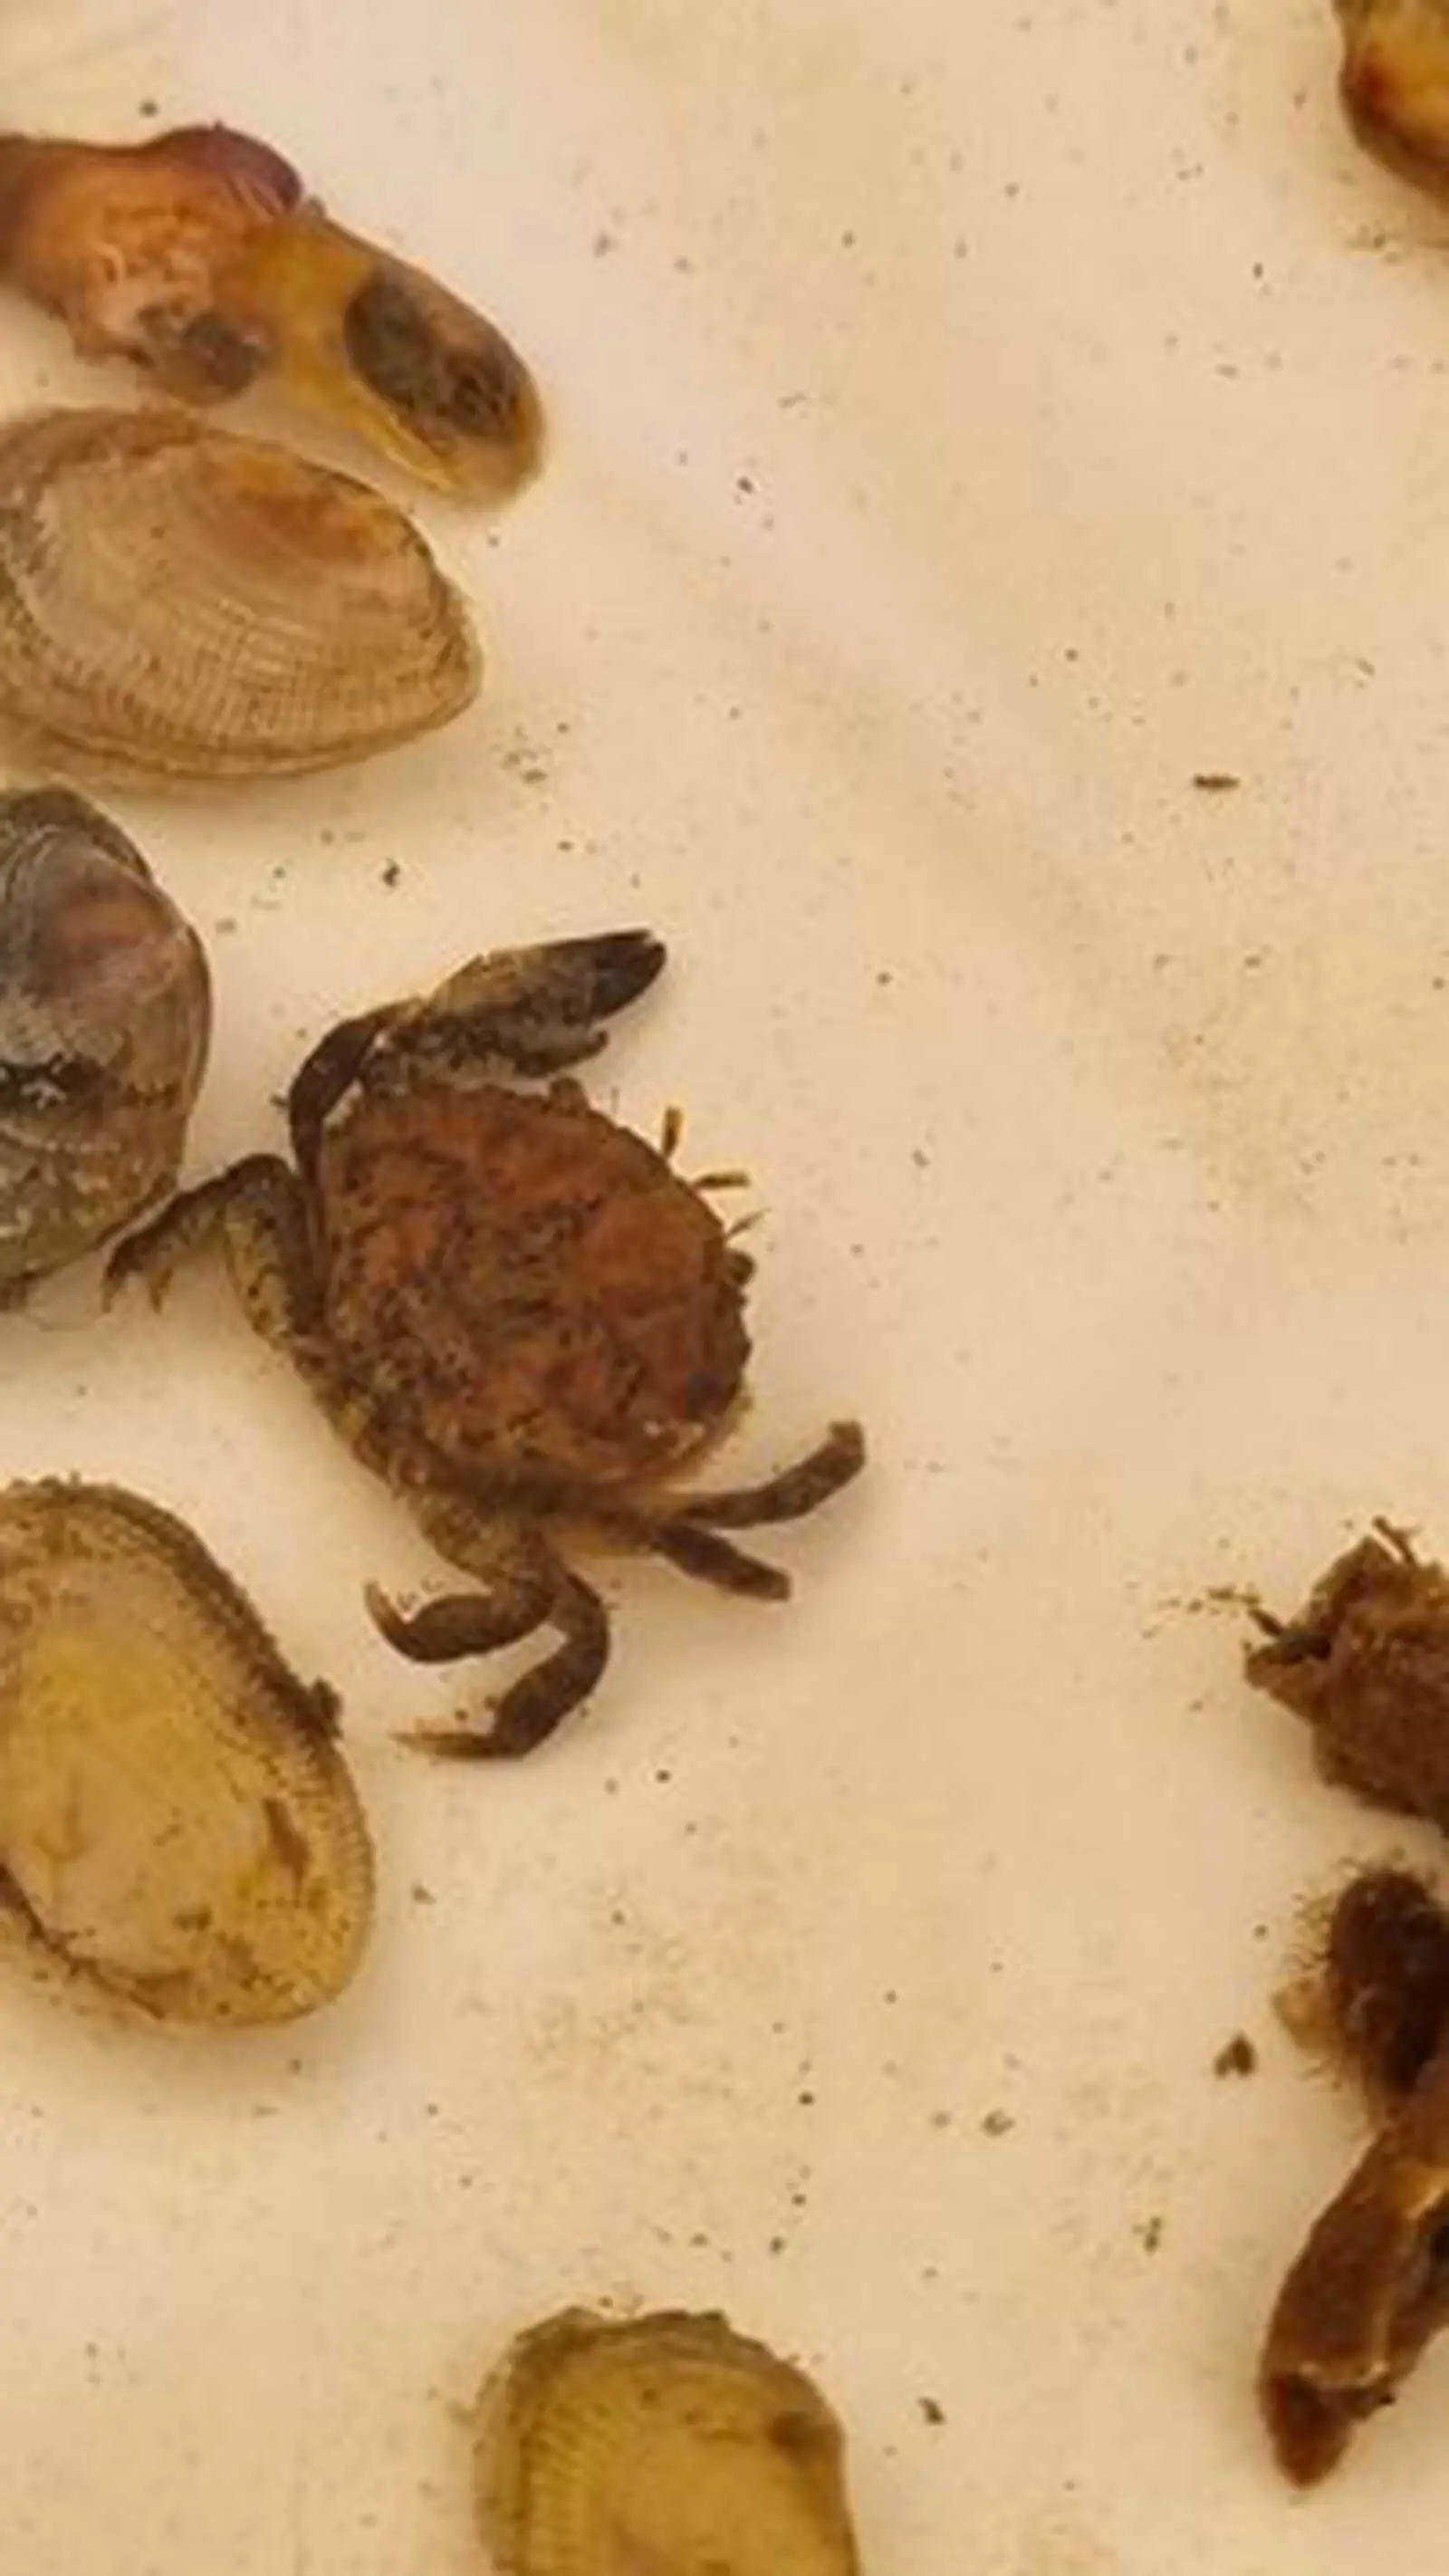 Crab and other sea life found in ROBs sitting in a tray